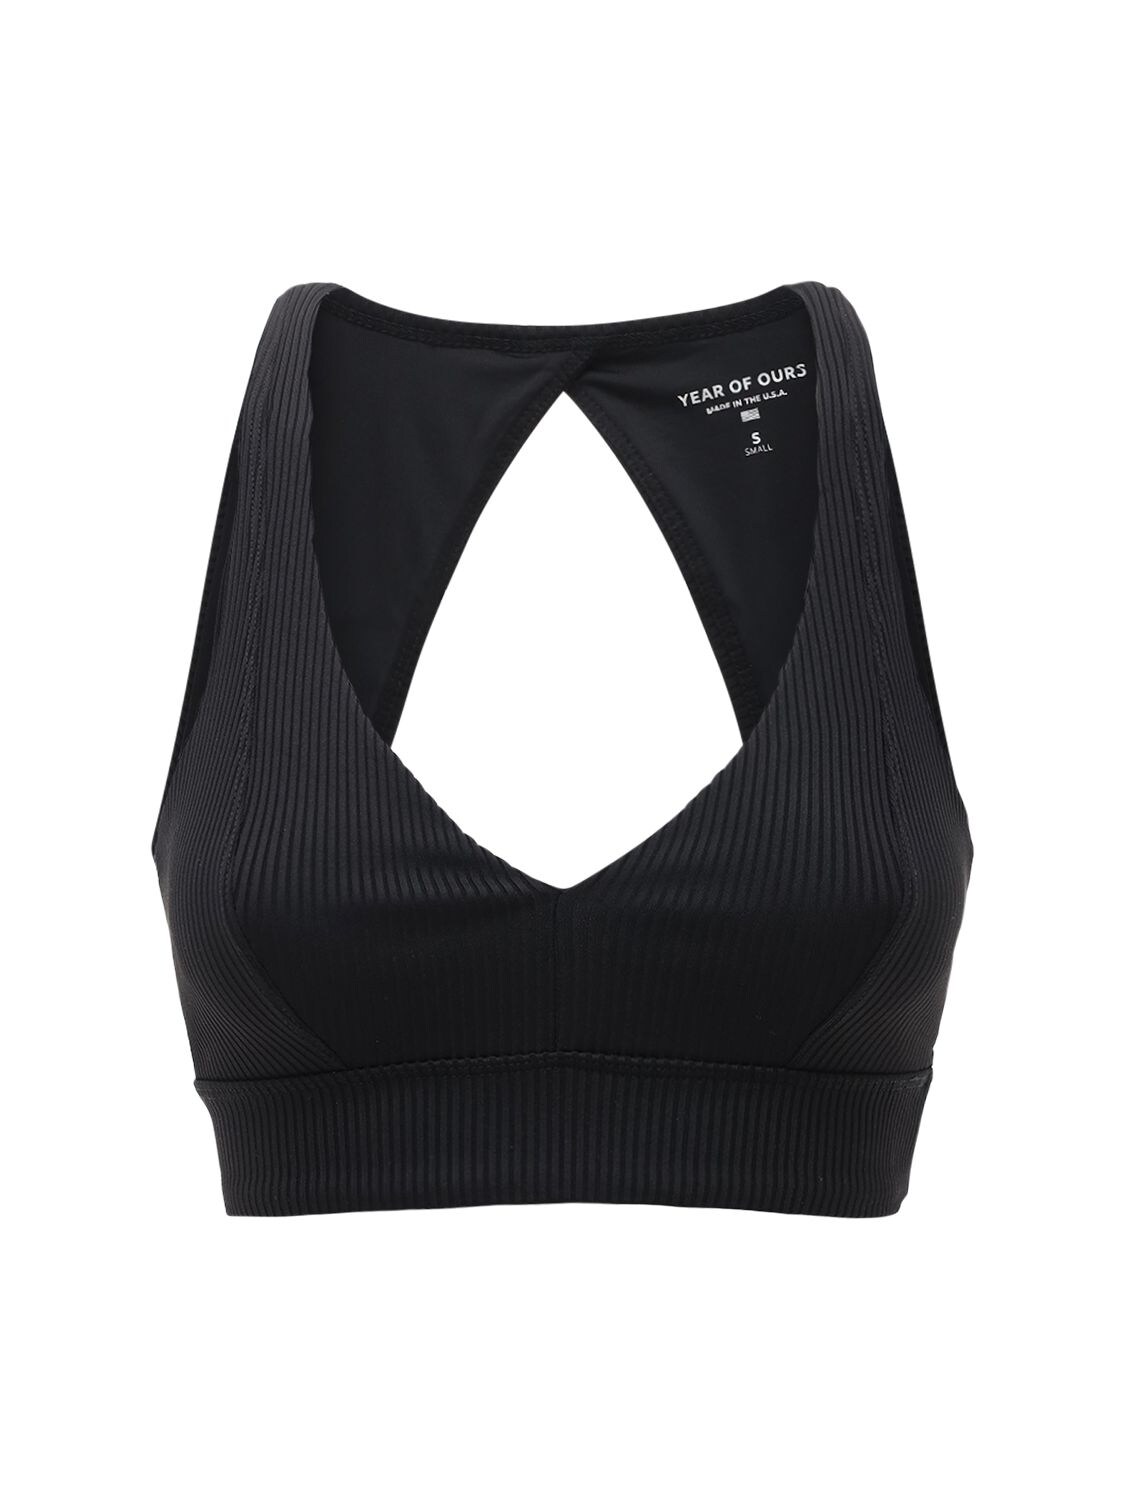 YEAR OF OURS VERONICA ACTIVE RIB BRA TOP,72IE80003-QKXBQ0S1